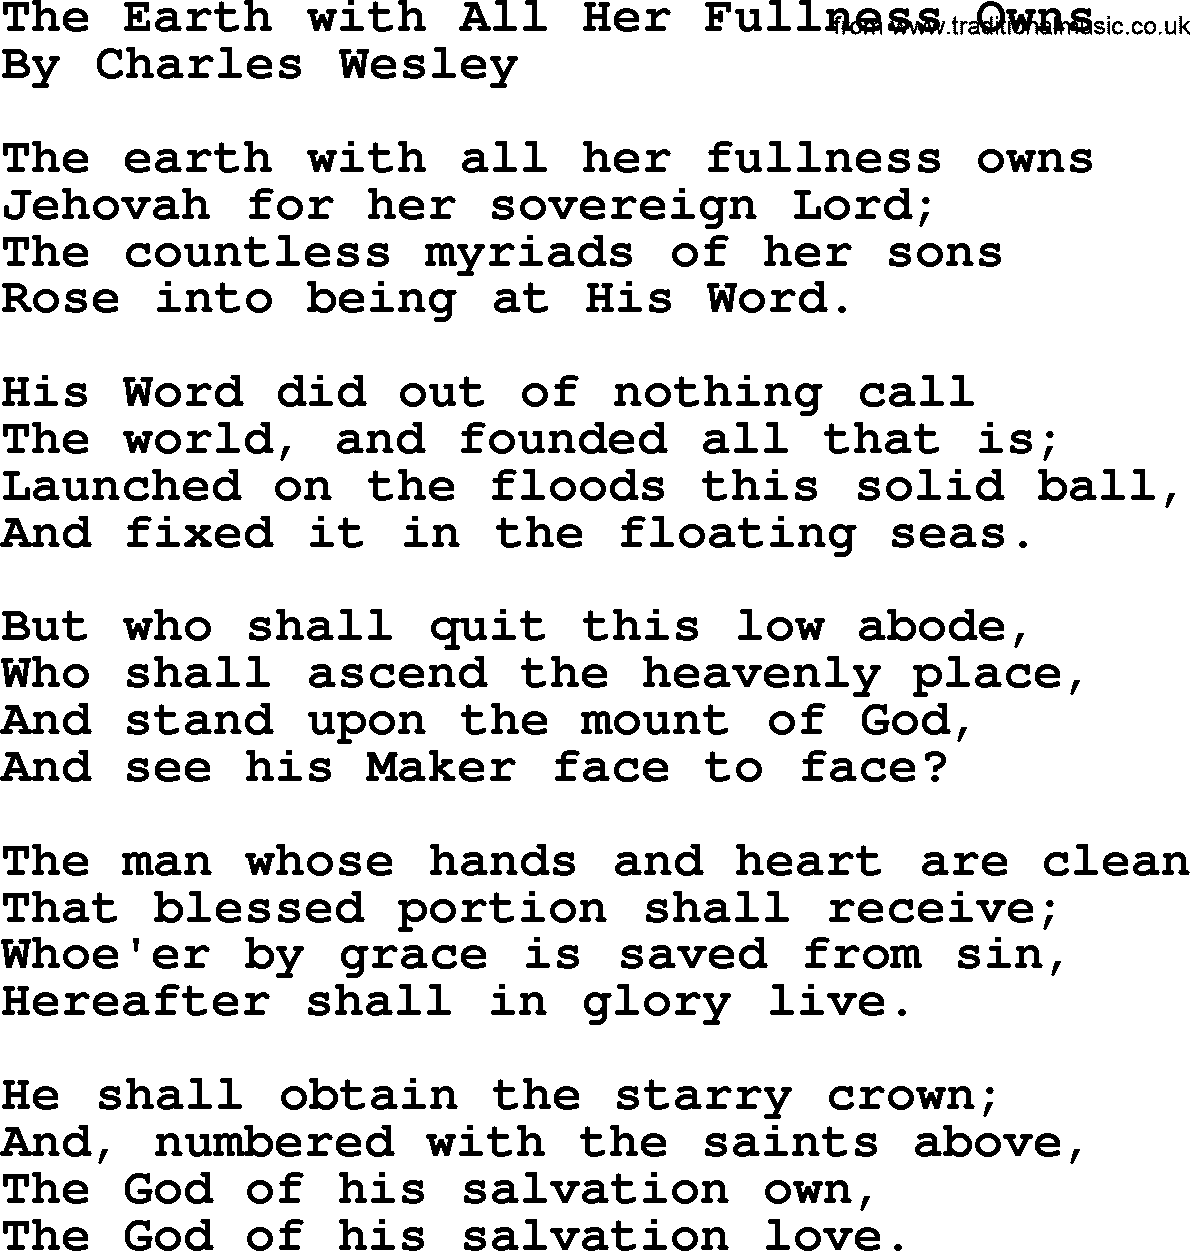 Charles Wesley hymn: The Earth with All Her Fullness Owns, lyrics